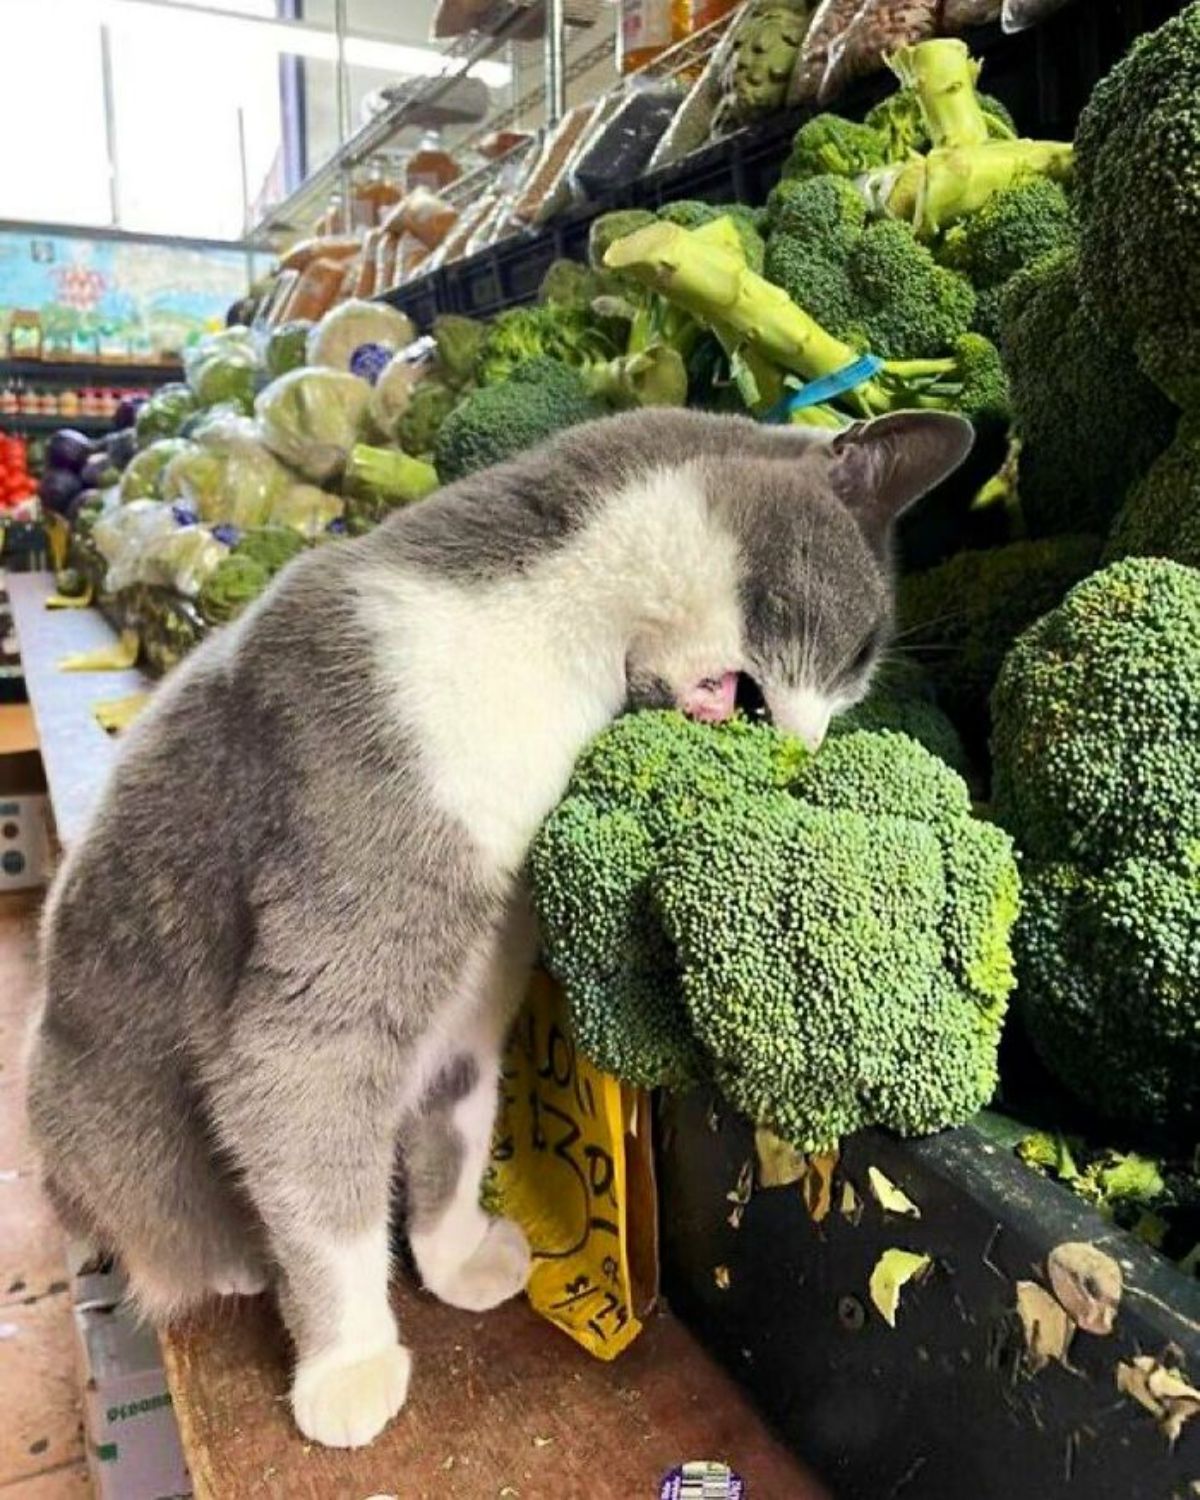 grey and white cat in a store biting some broccoli